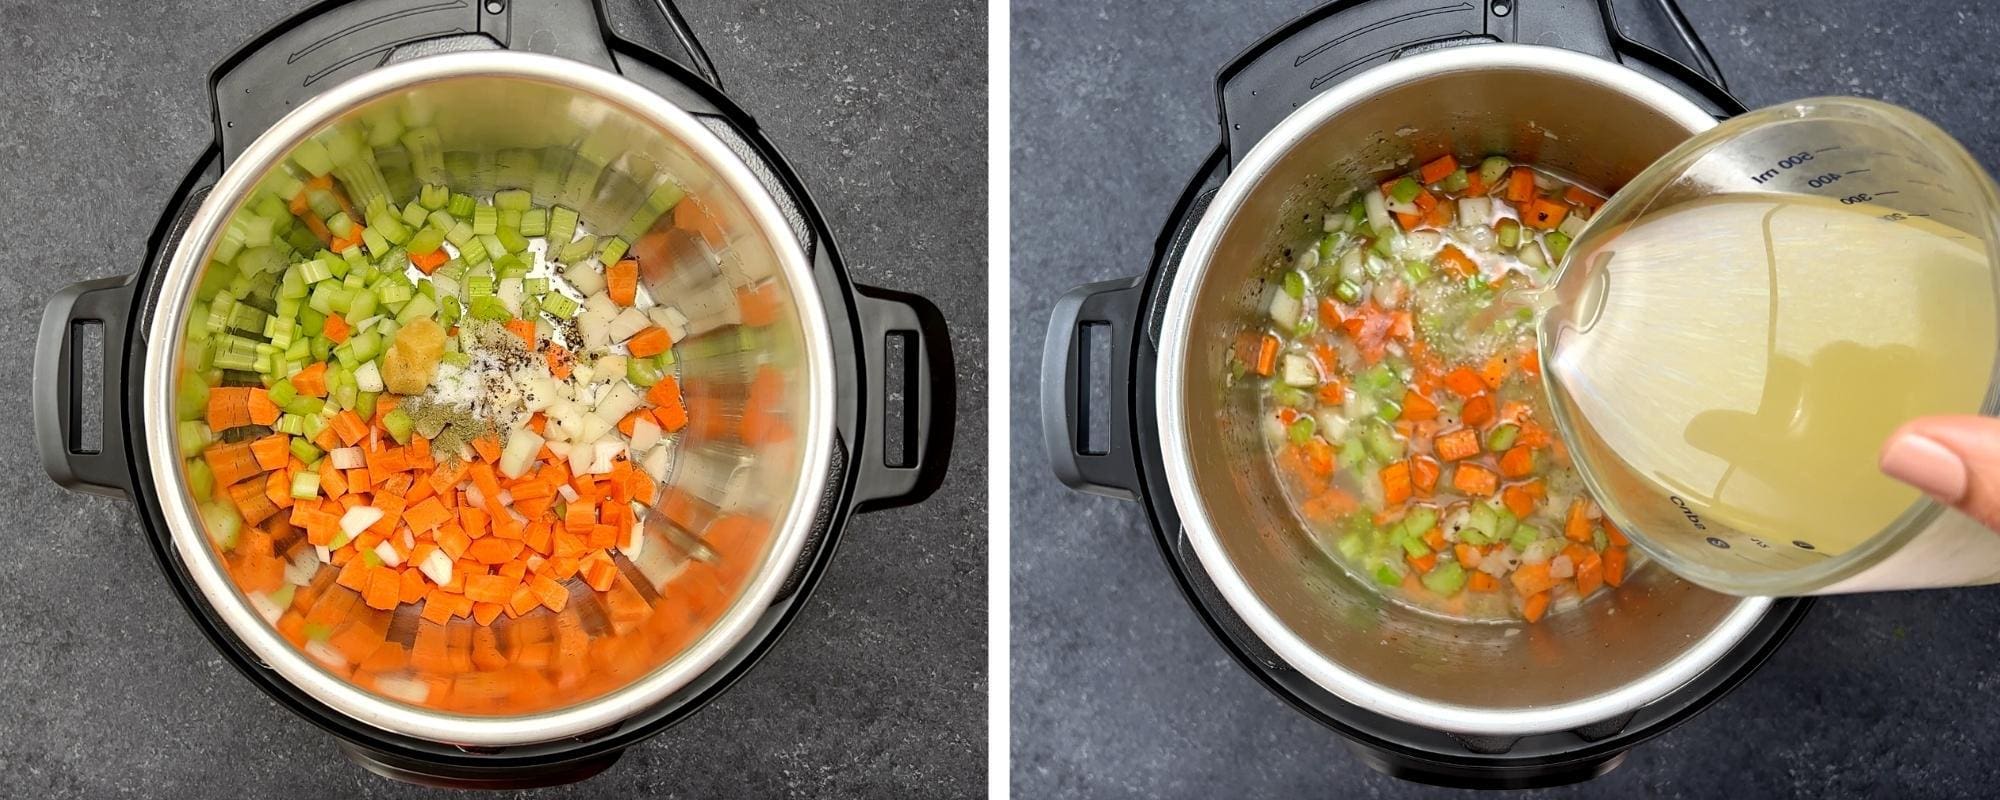 veggies being cooked in broth in the instant pot for lemon orzo soup